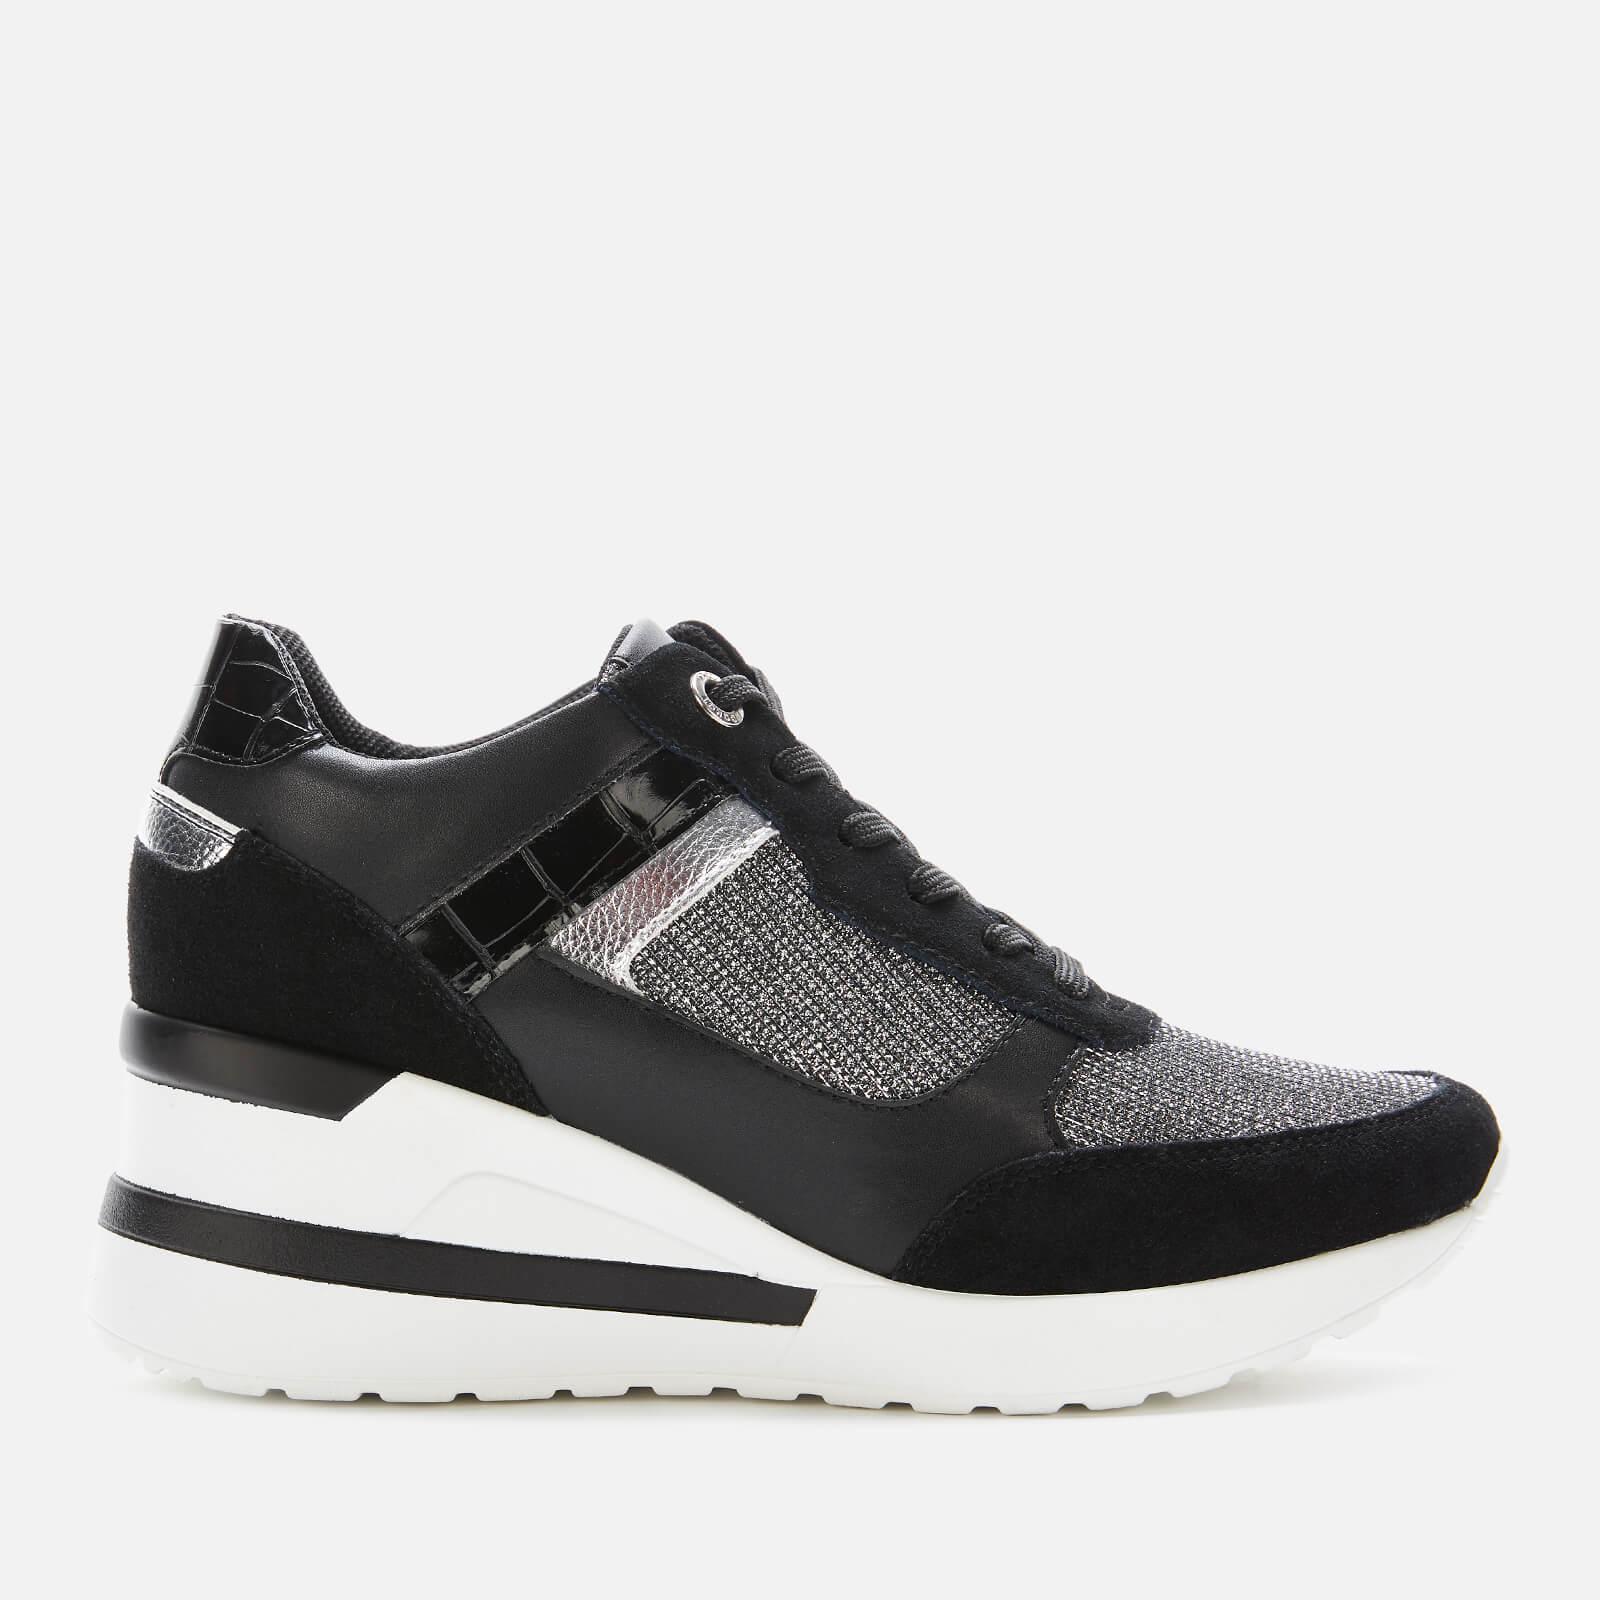 Dune Leather Elouera Wedged Trainers in Black - Lyst